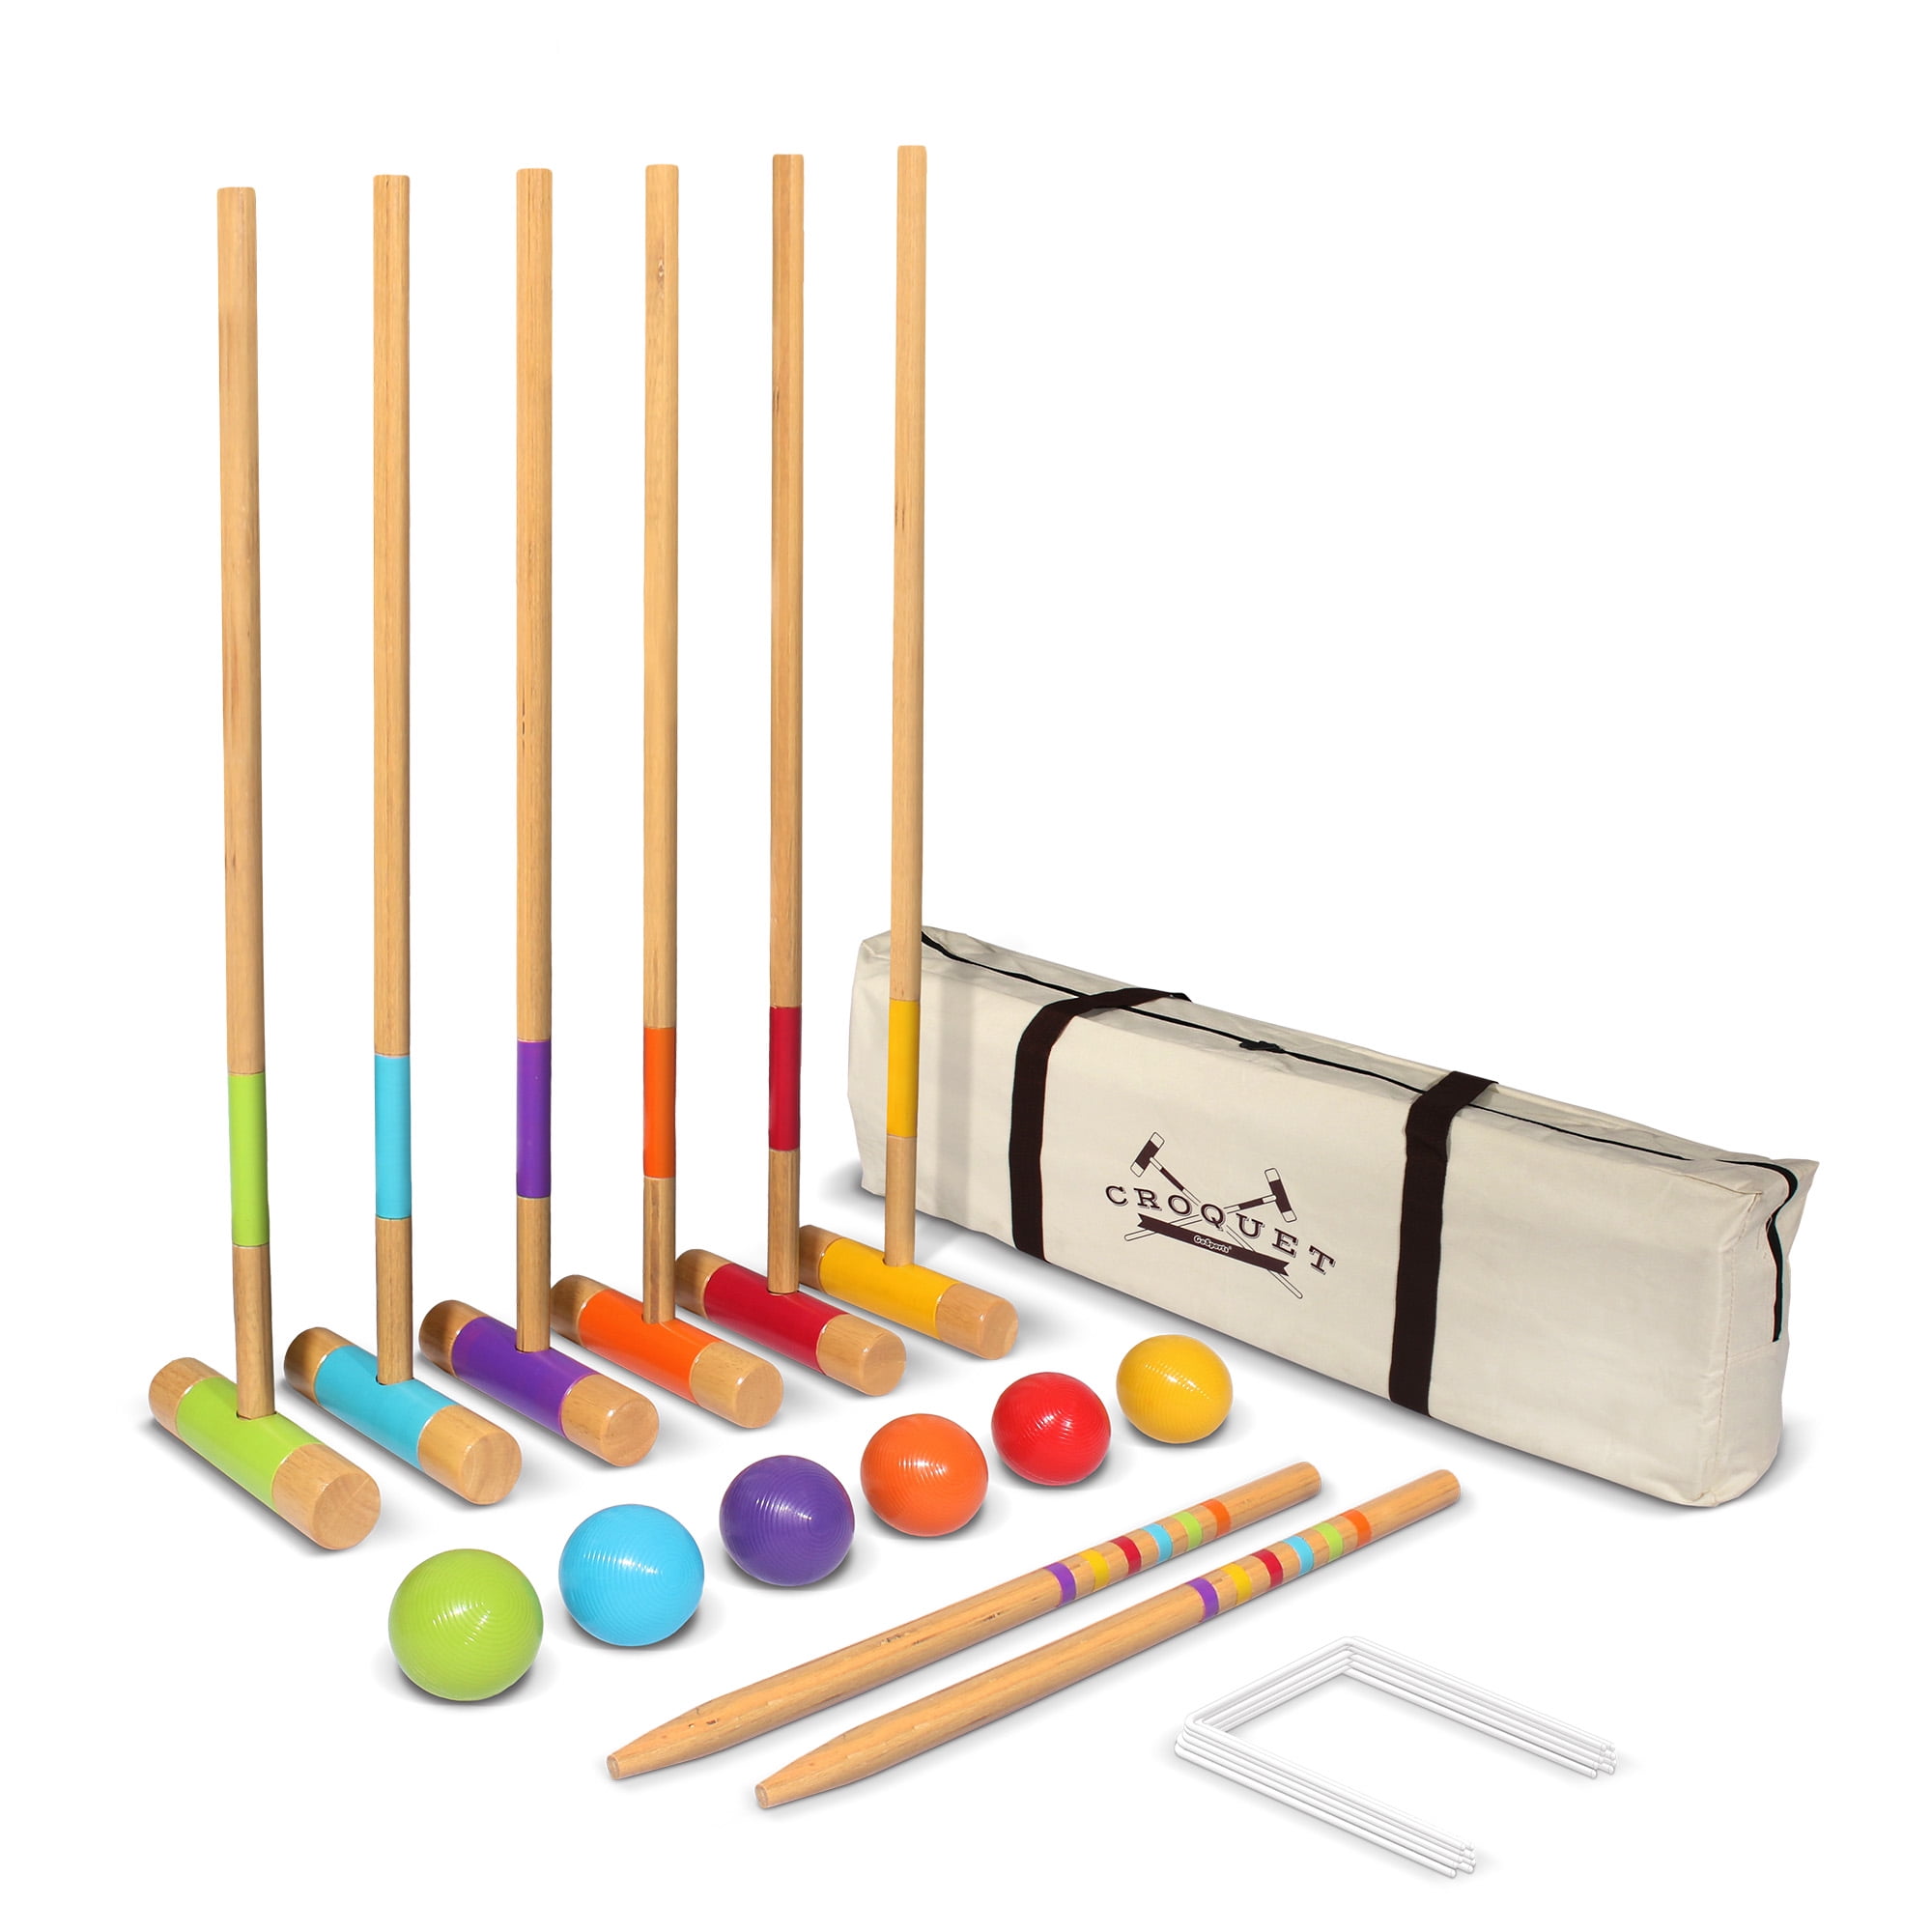 6 Players 31-Inch Deluxe Croquet Game Set for Family LULULION Croquet Set for Kids and Adults Durable Hardwood Material Includes Extra Large Carrying Bag 